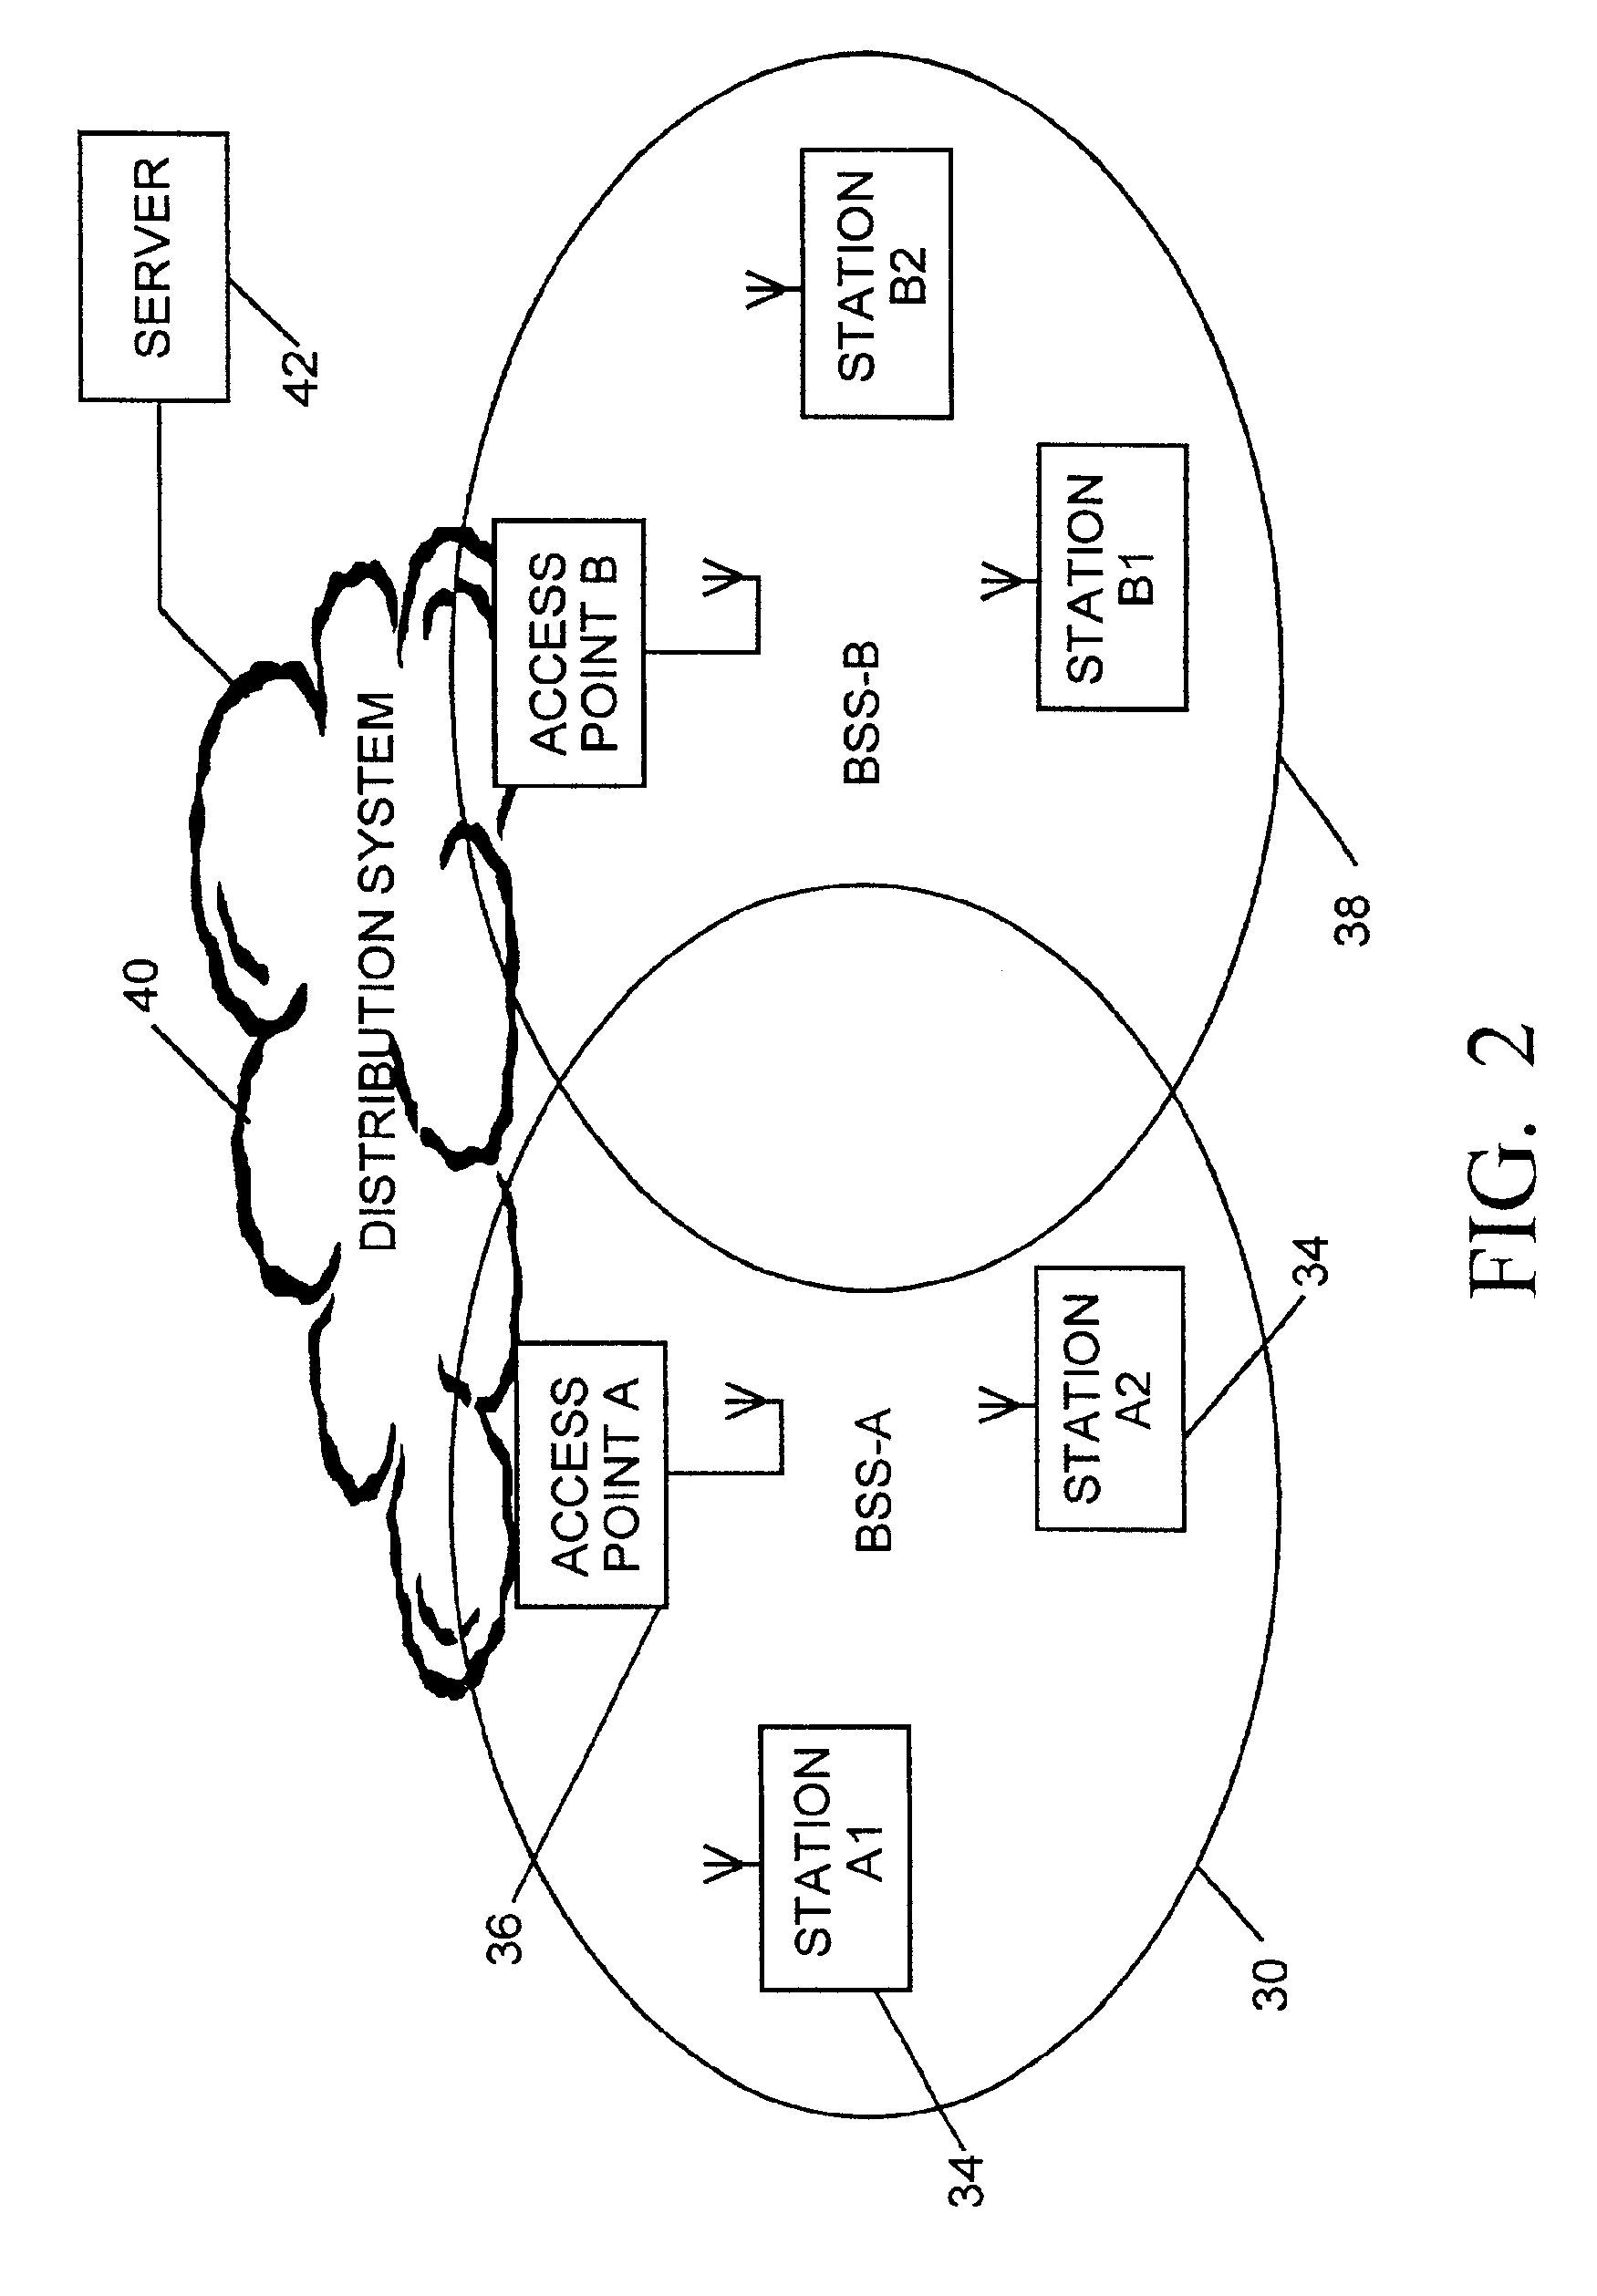 Fast transform system for an extended data rate WLAN system